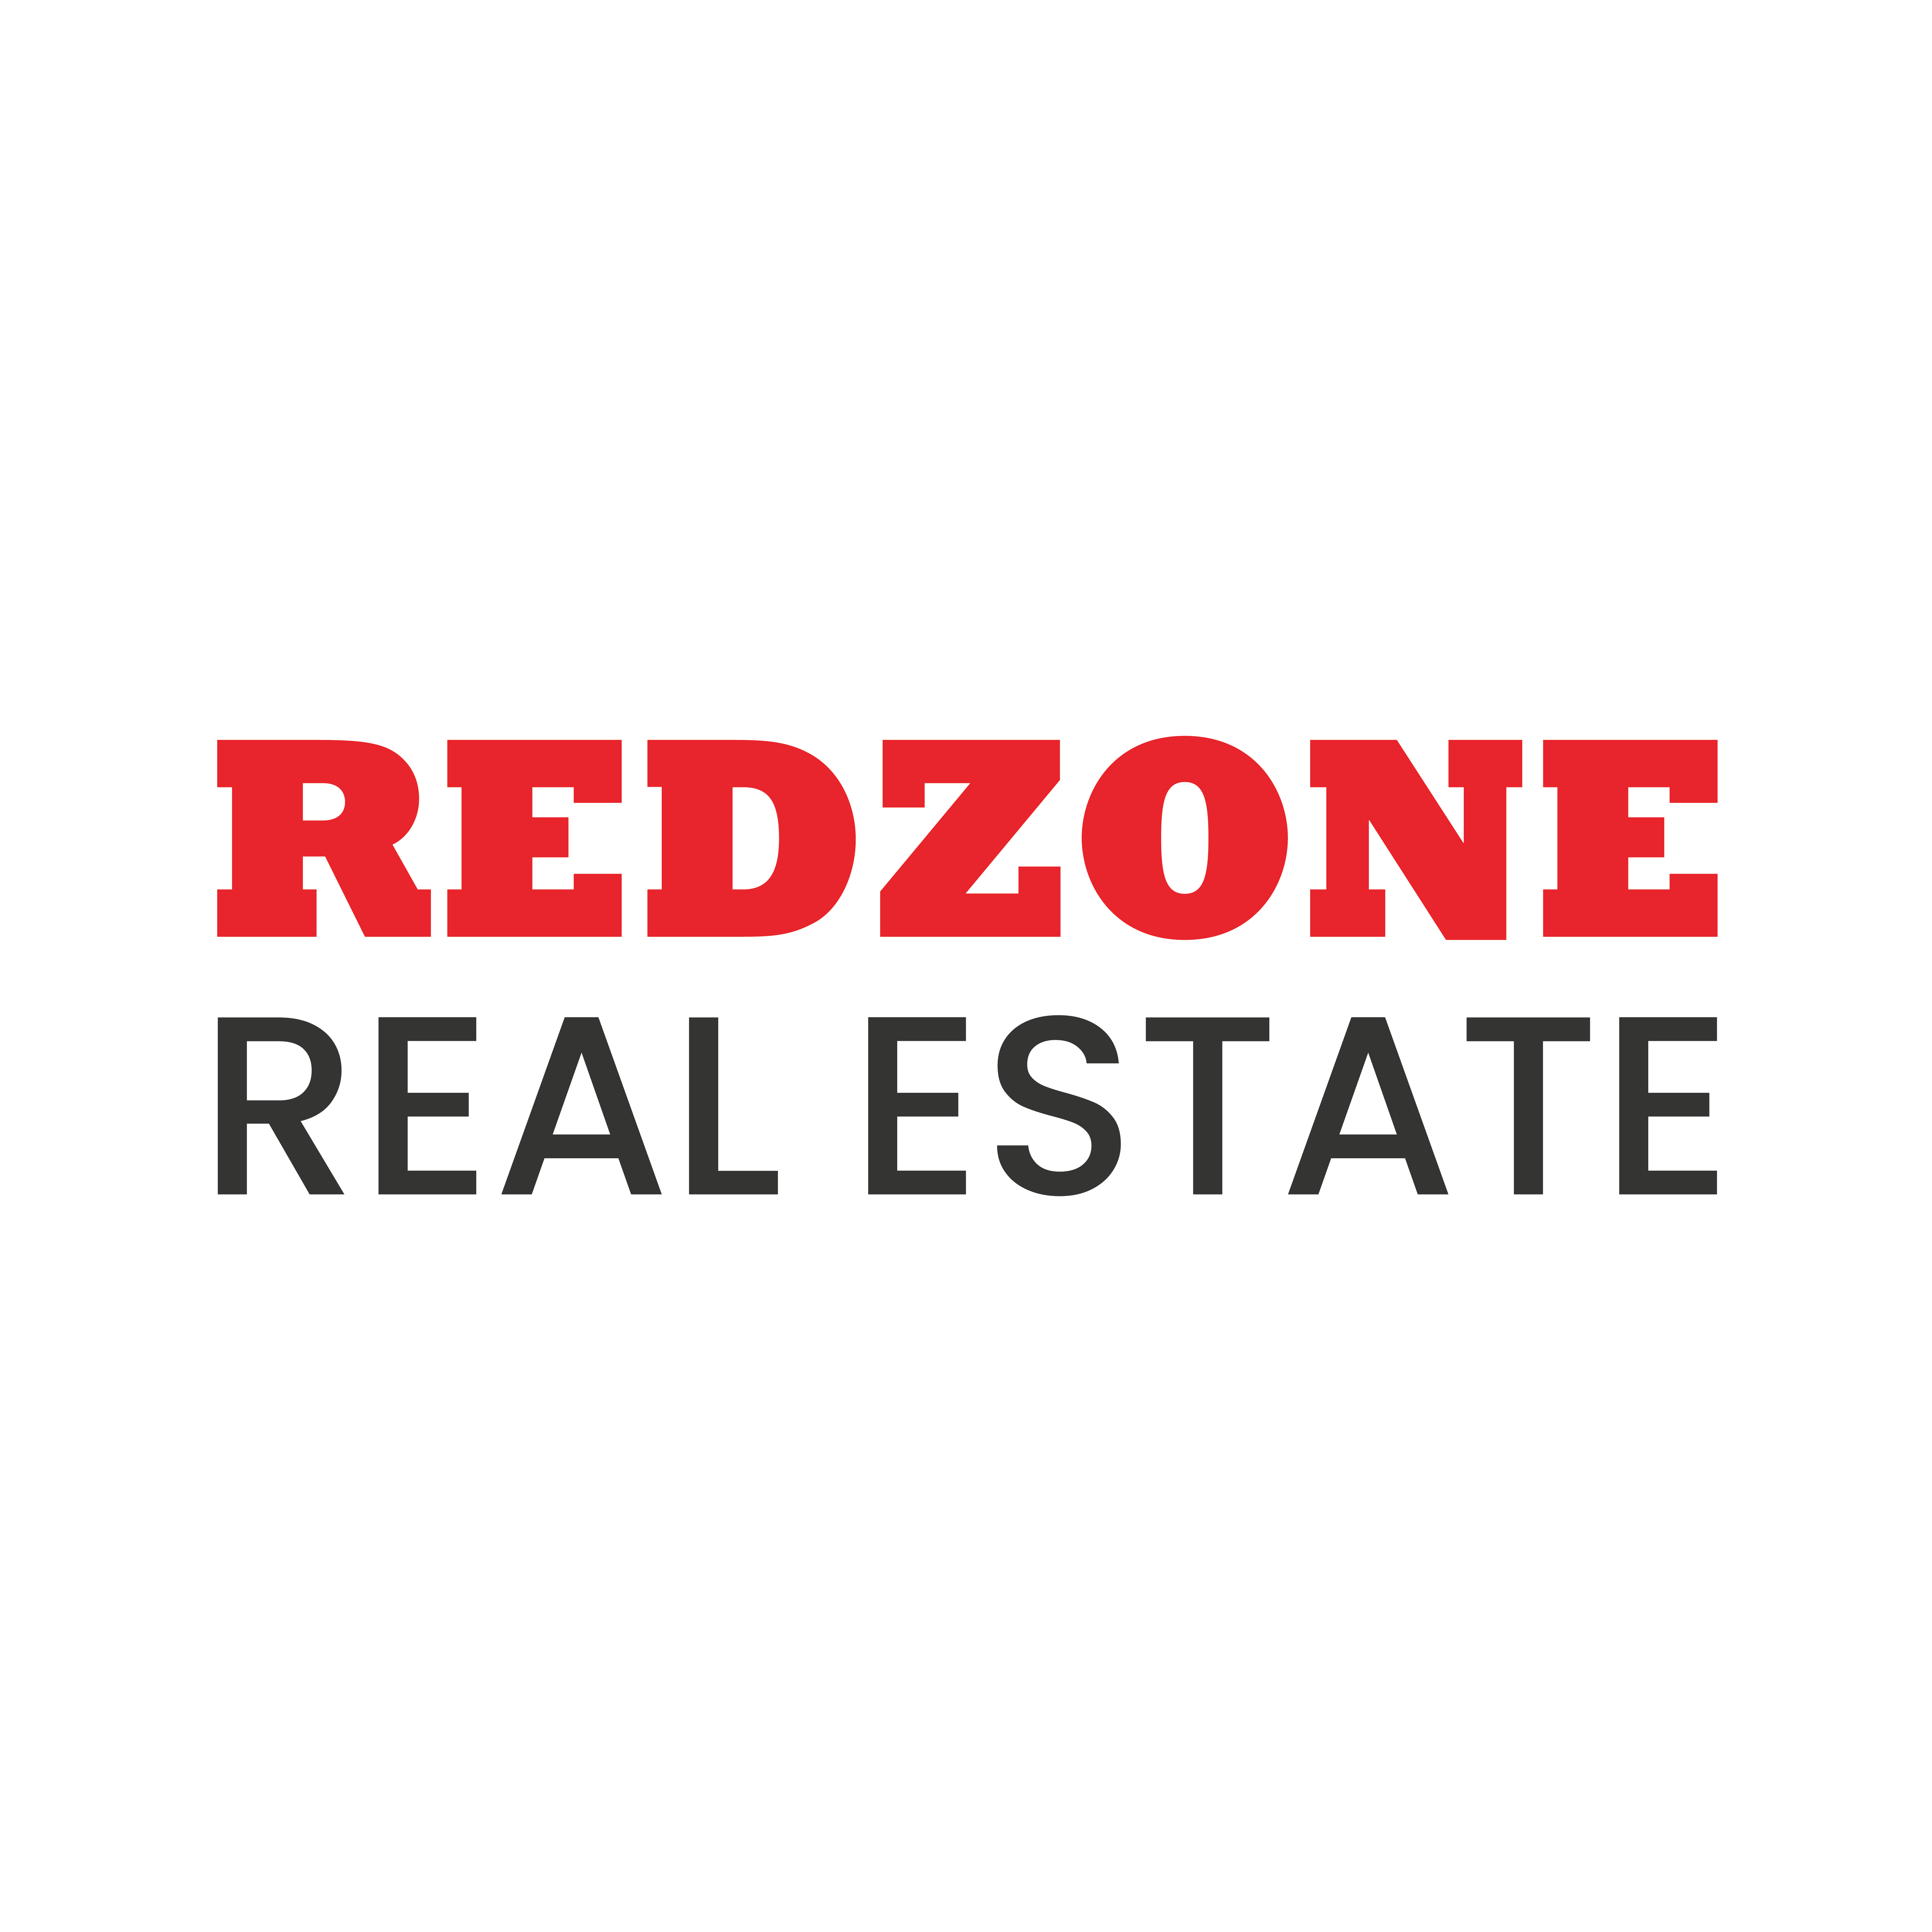 United States agency Horizon Digital Creatives helped Redzone Real Estate grow their business with SEO and digital marketing